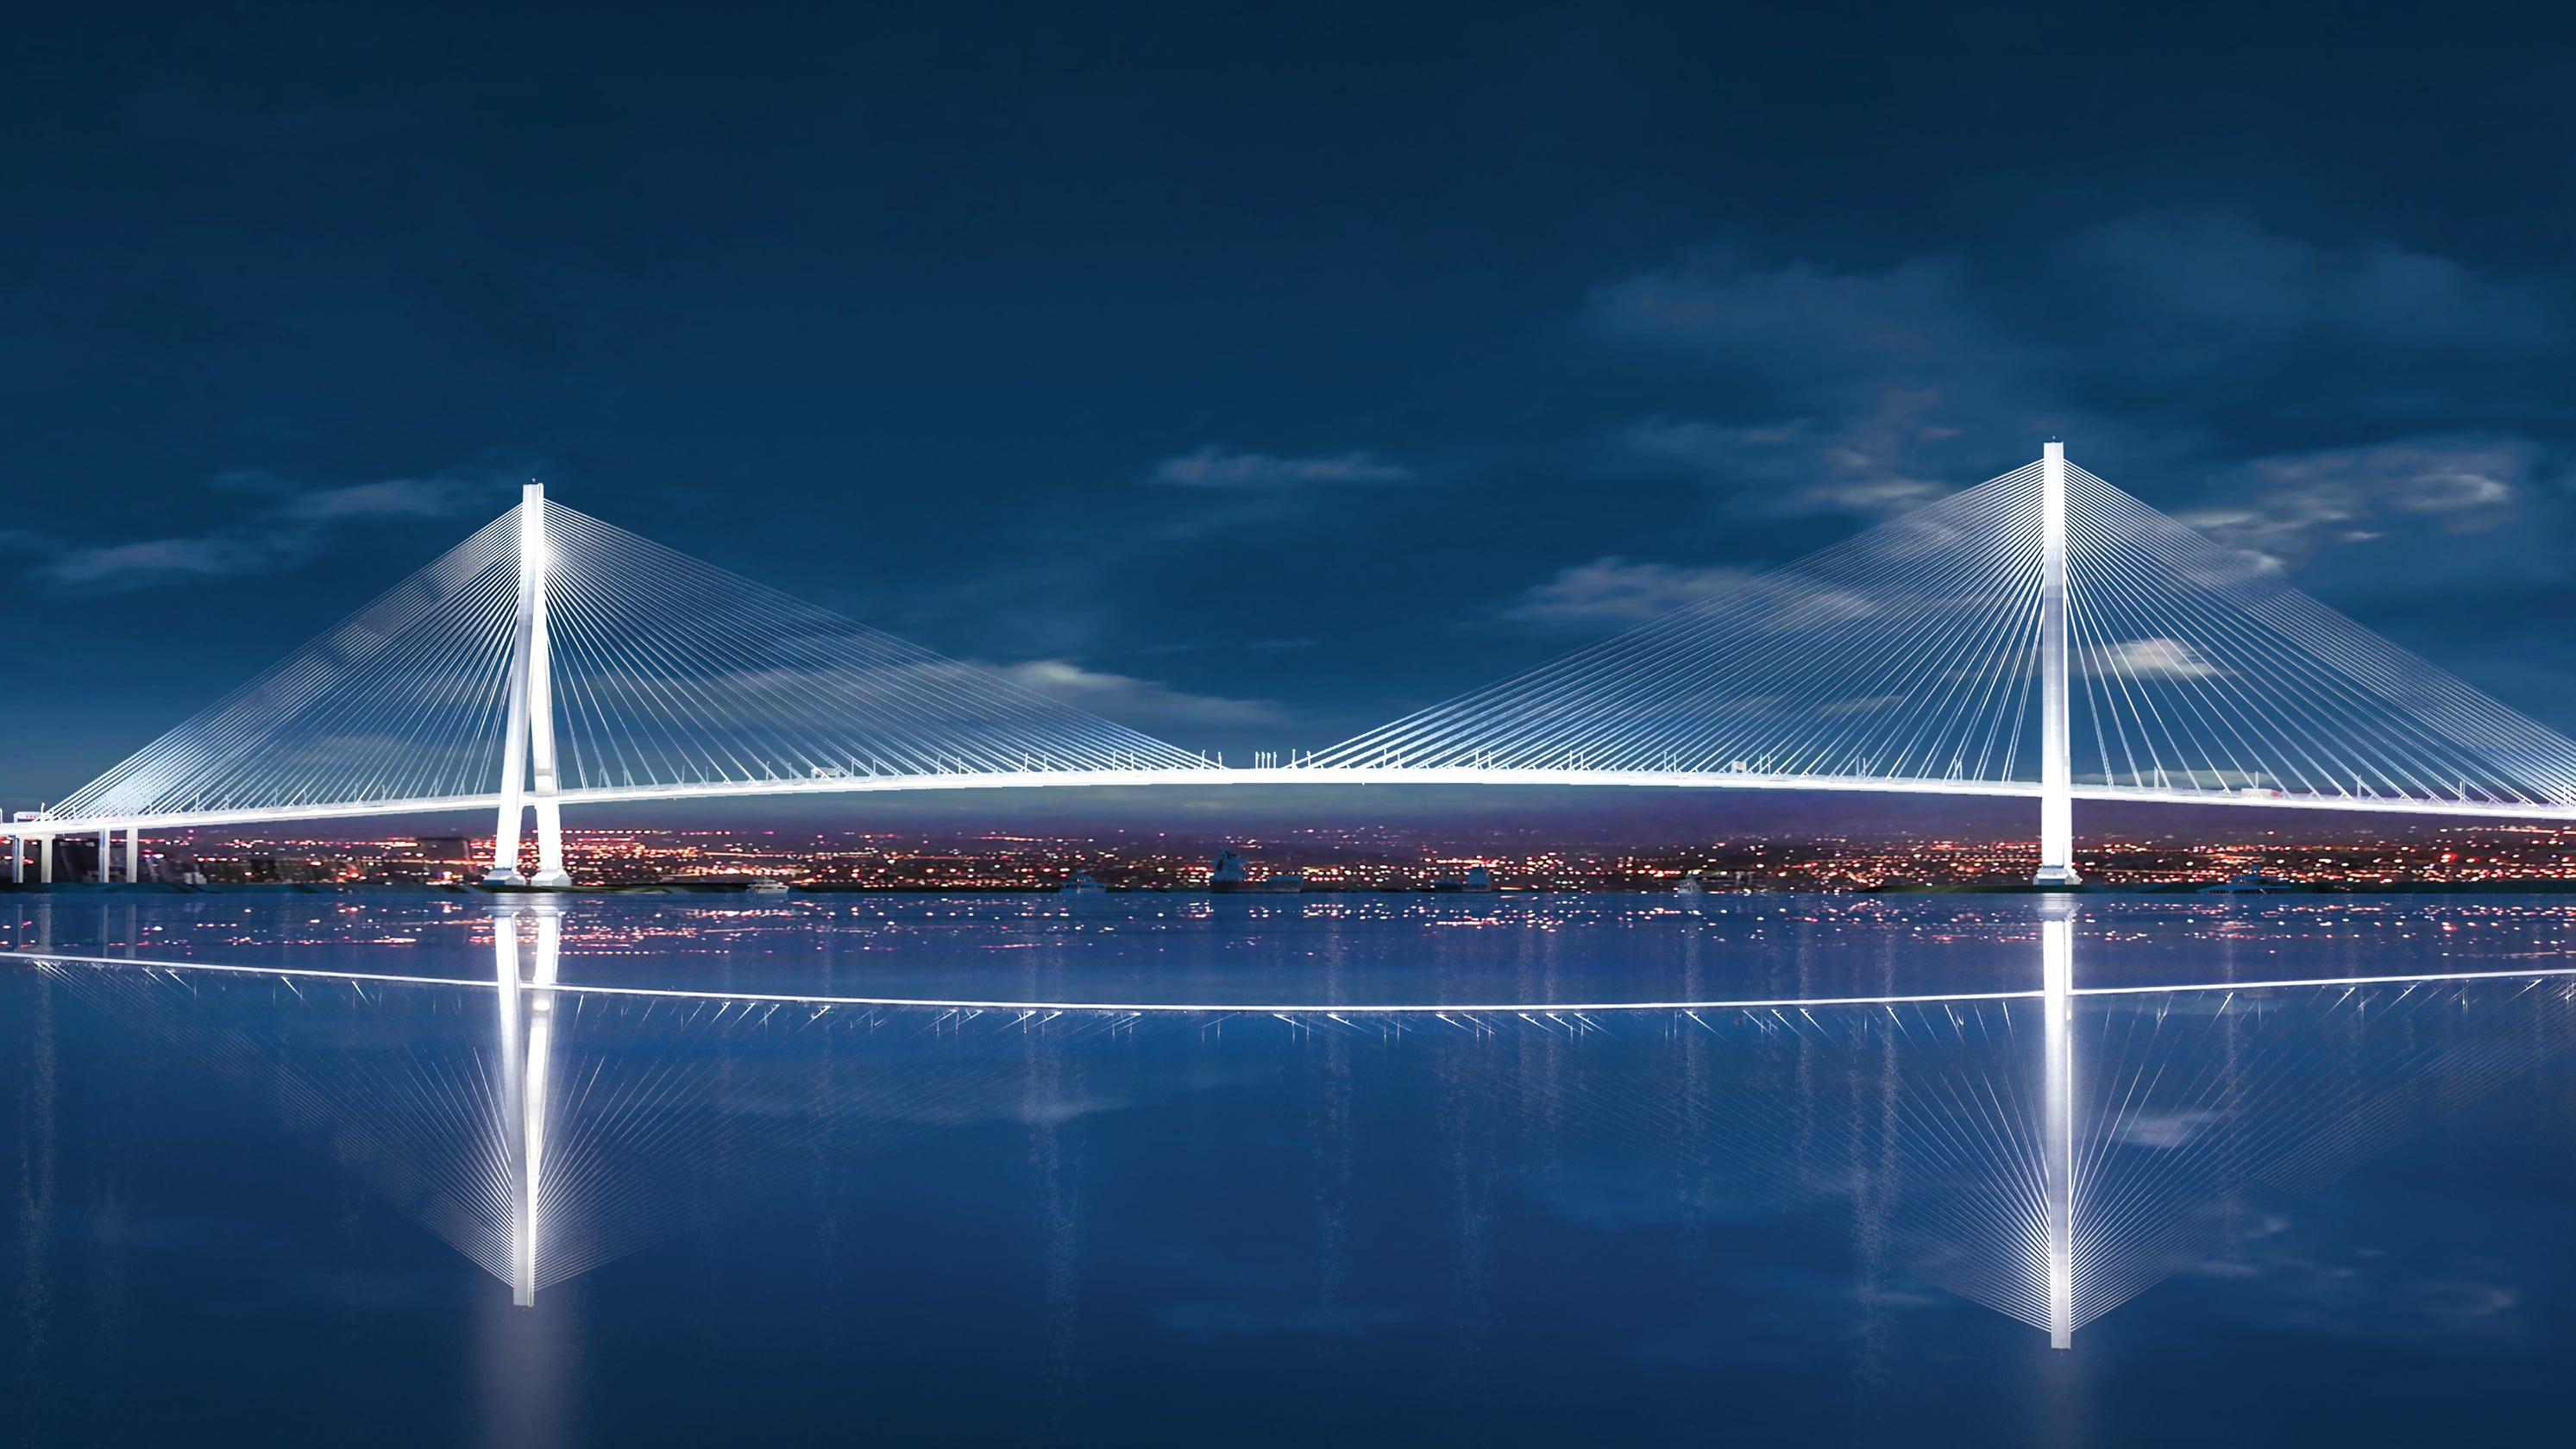 New Gordie Howe bridge receives funding from the U.S. government | The ...